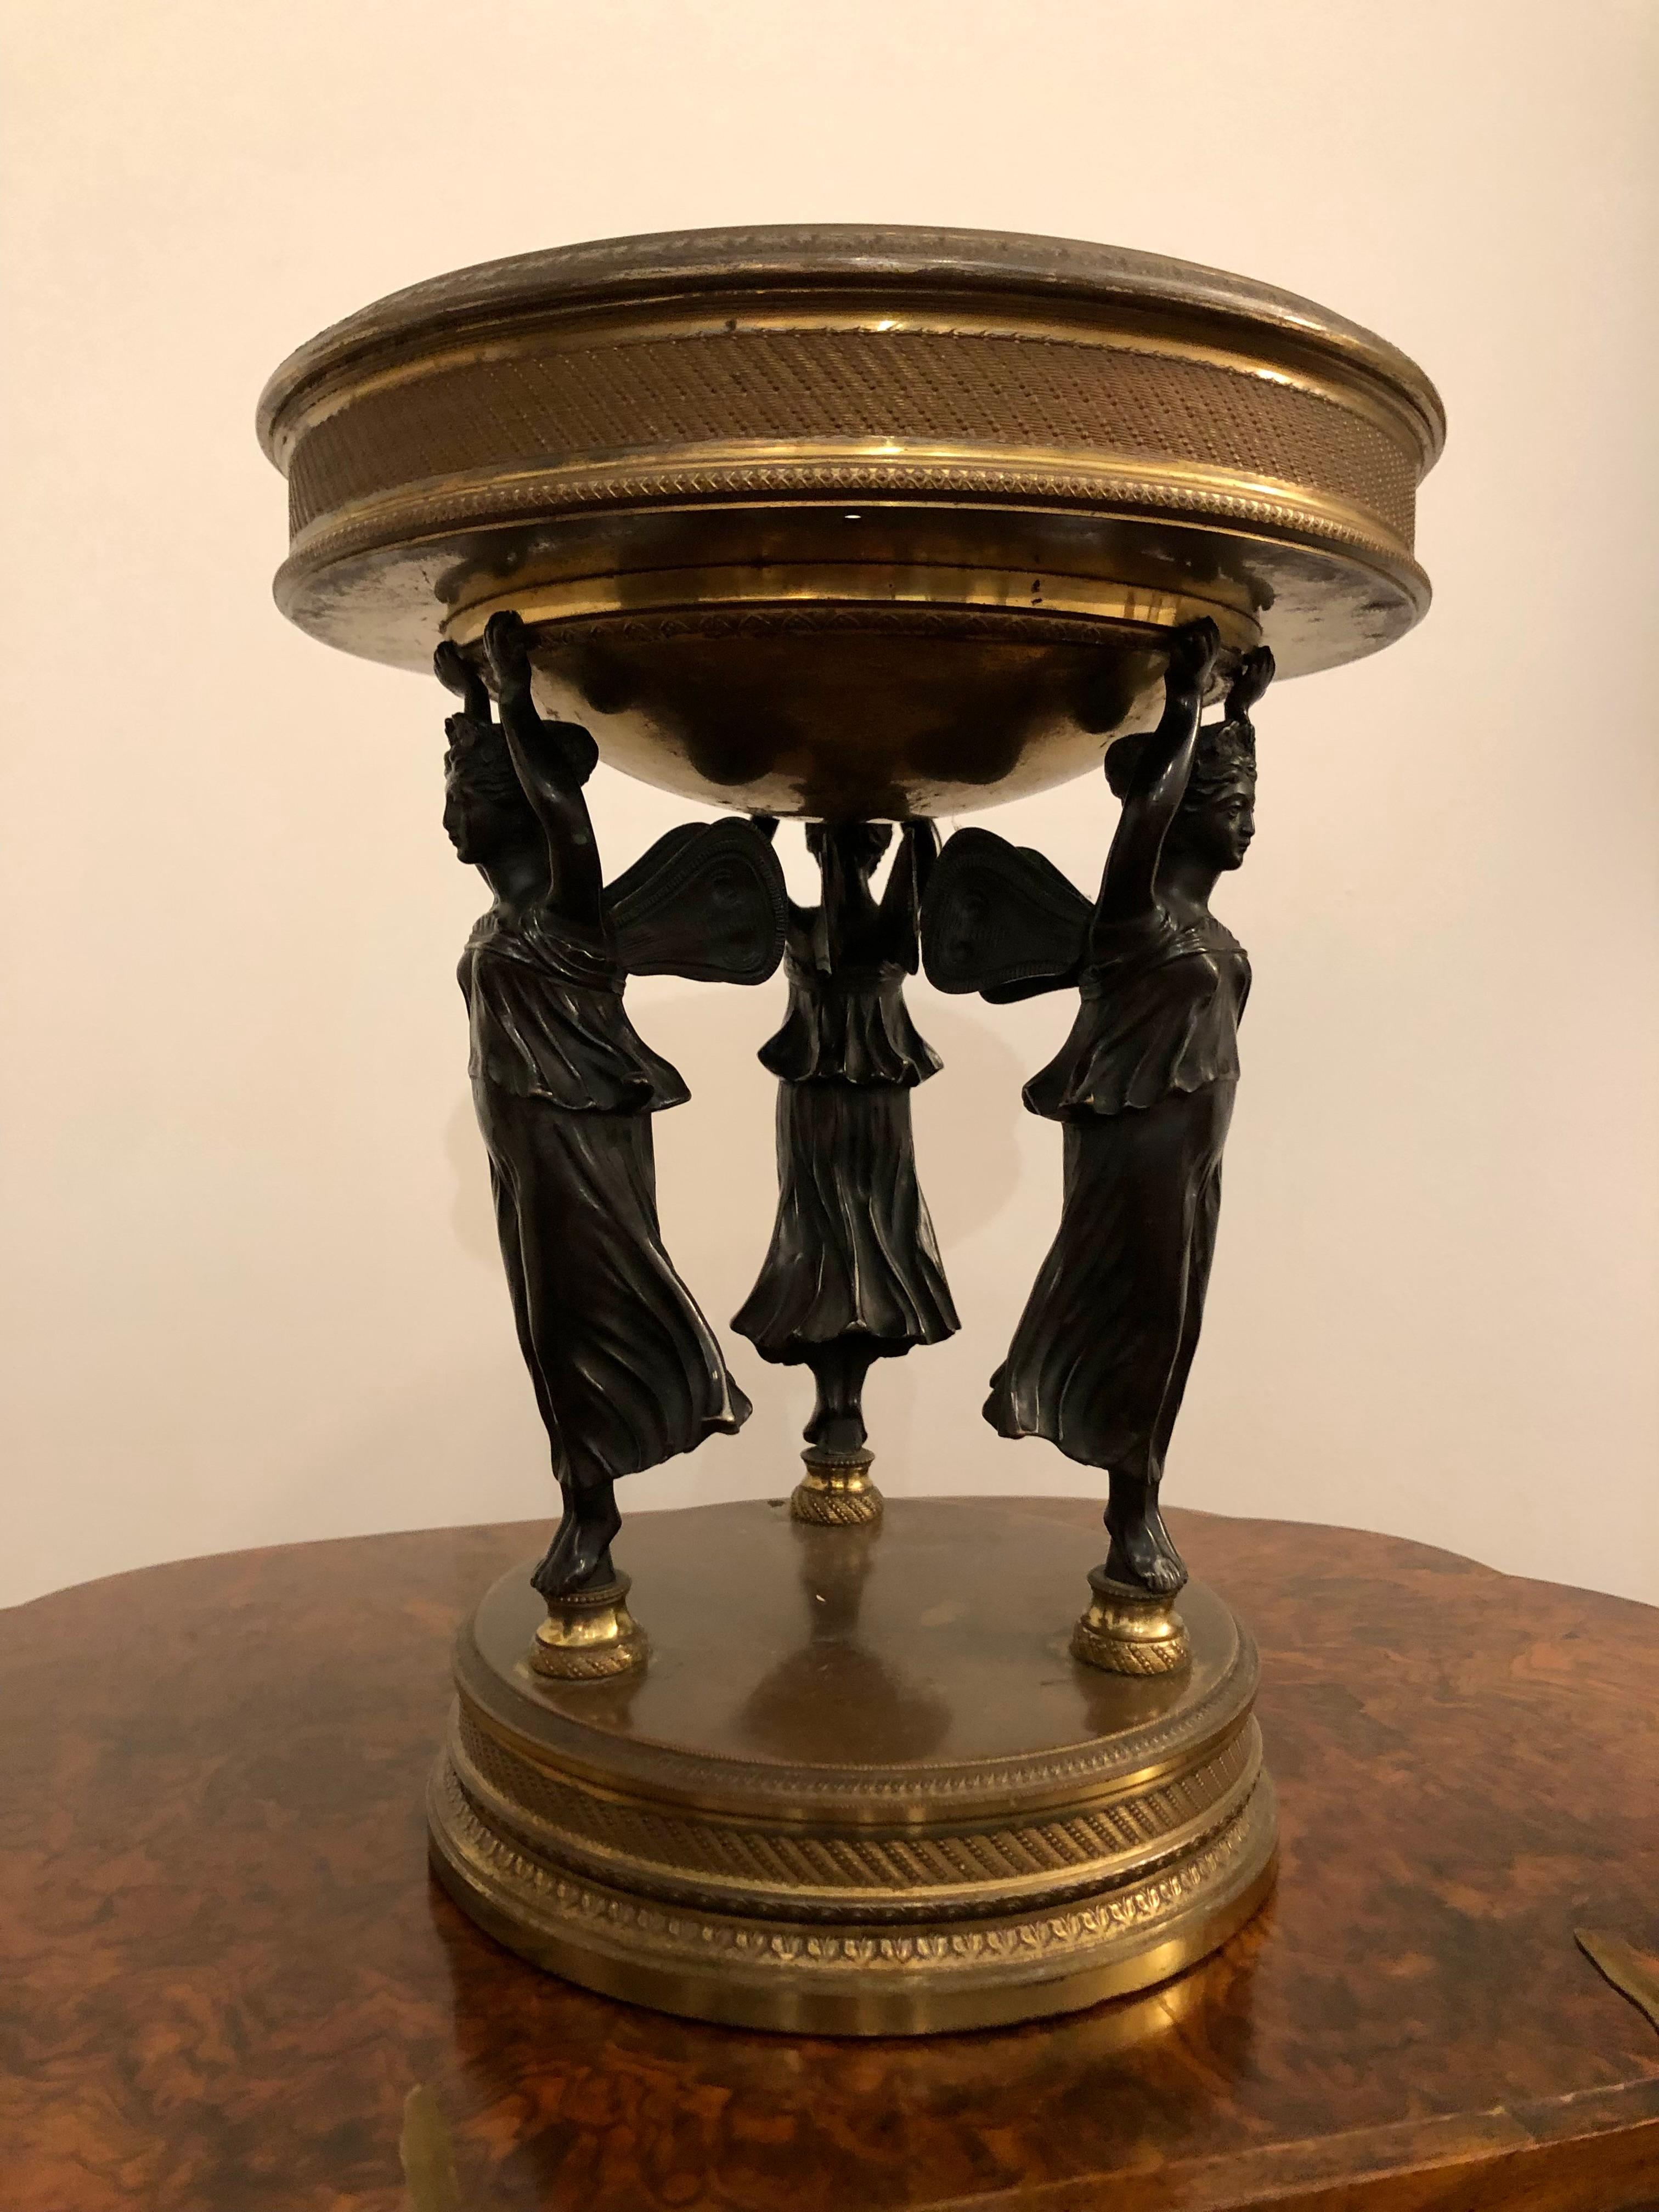 A wonderful French Neoclassical bronze and gilt centrepiece from the nineteenth century.
With three bronze caryatid fairy figures holding gilt brass mounts, likely for larger centrepiece with glass addition.
10.25